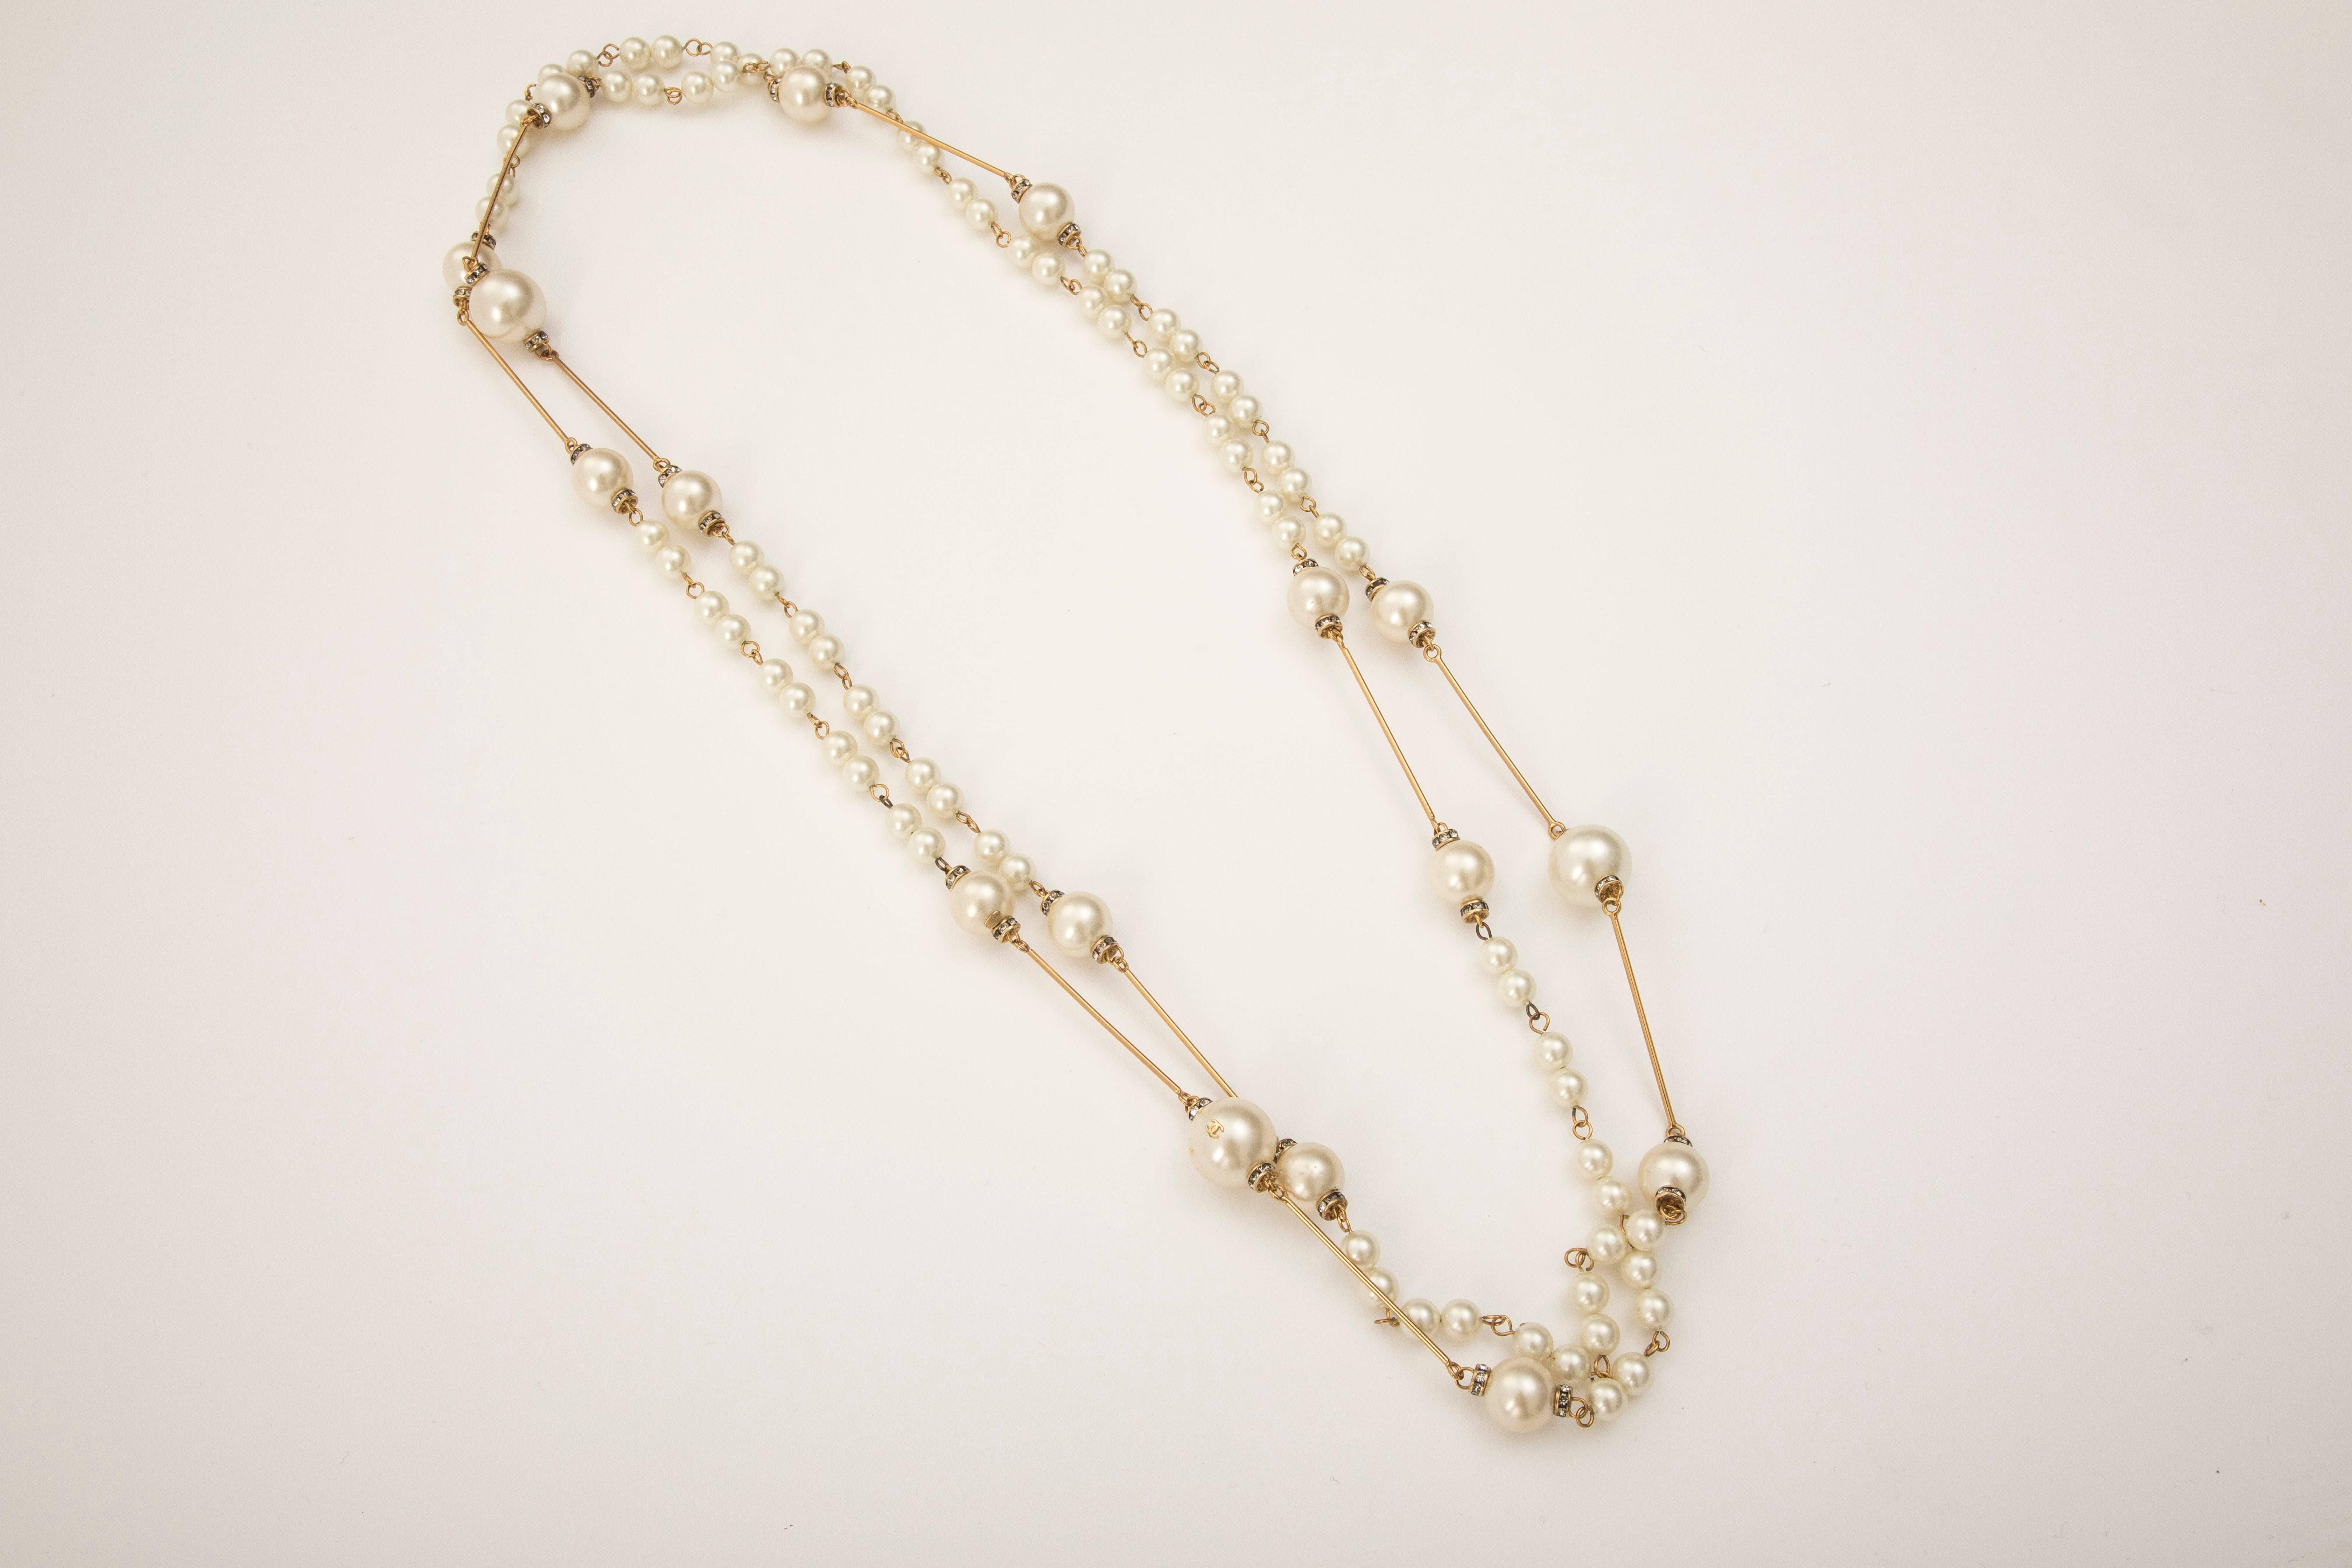 faux chanel long pearl necklace uk